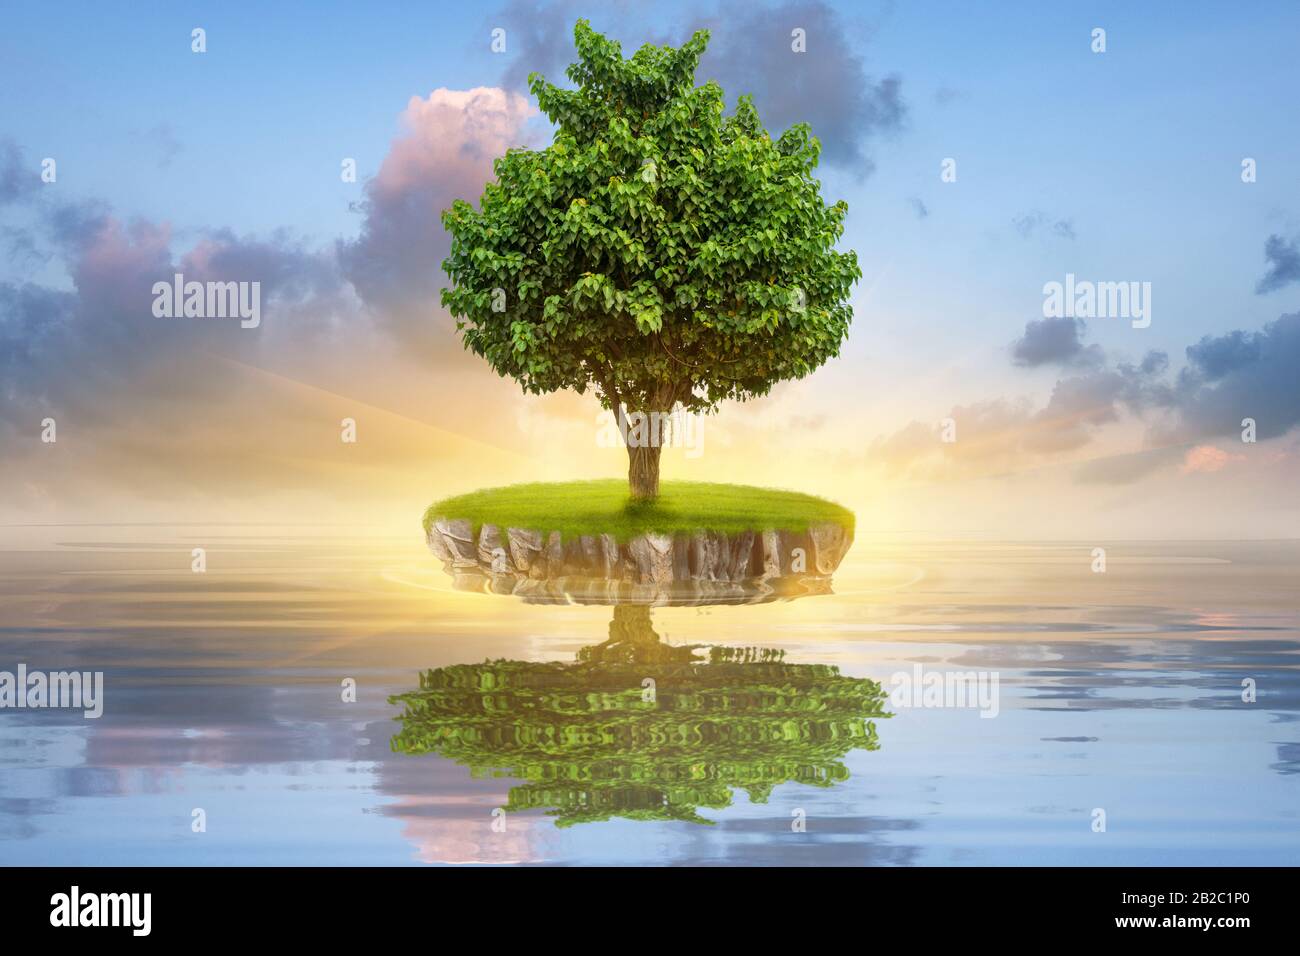 Small green island with lonely tree reflection in quiet water of the ocean. Financial business Concept. Stock Photo